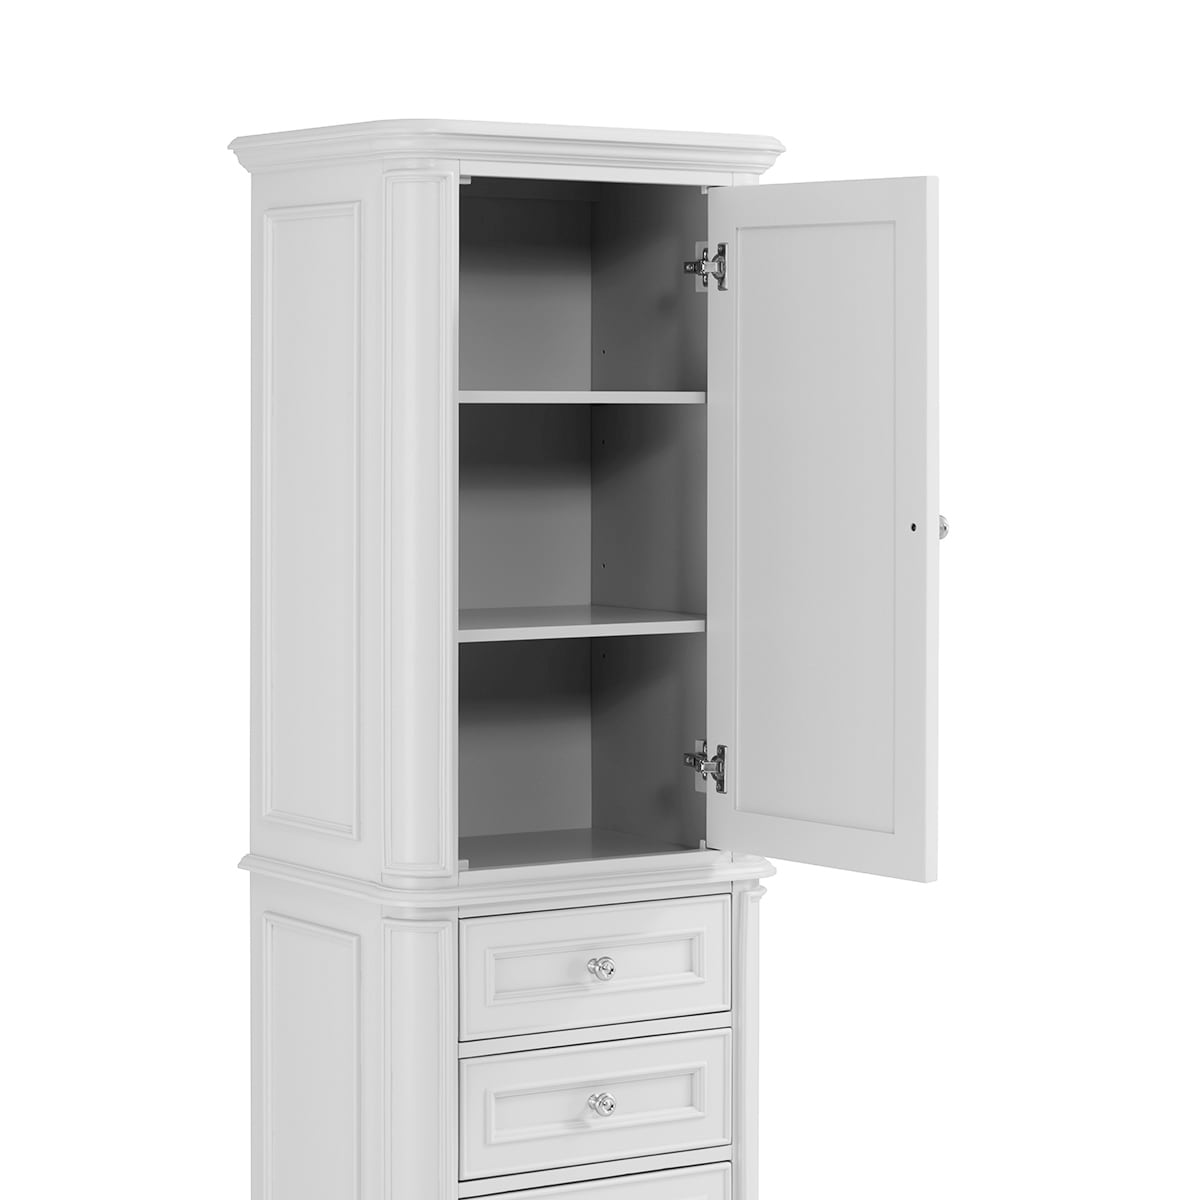 Oxfordshire 11.8'' W x 55.7'' H x 11.8'' D Free-Standing Linen Cabinet Rosecliff Heights